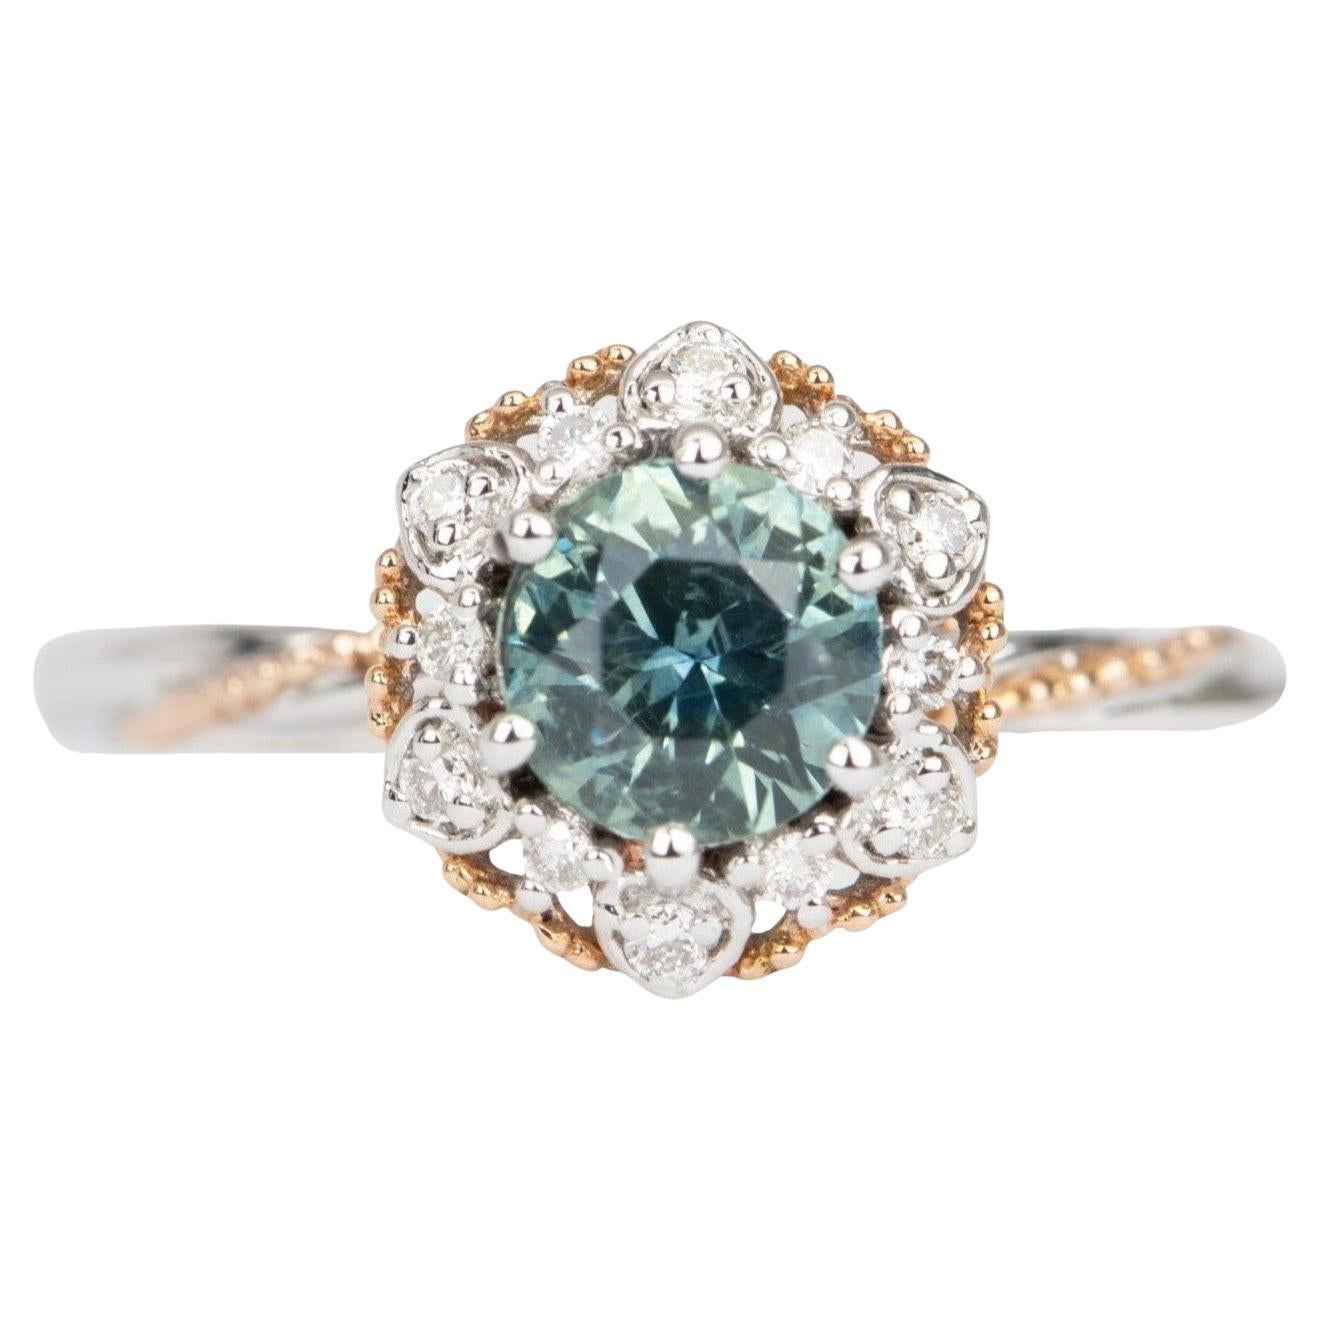 Are teal sapphires ethical?